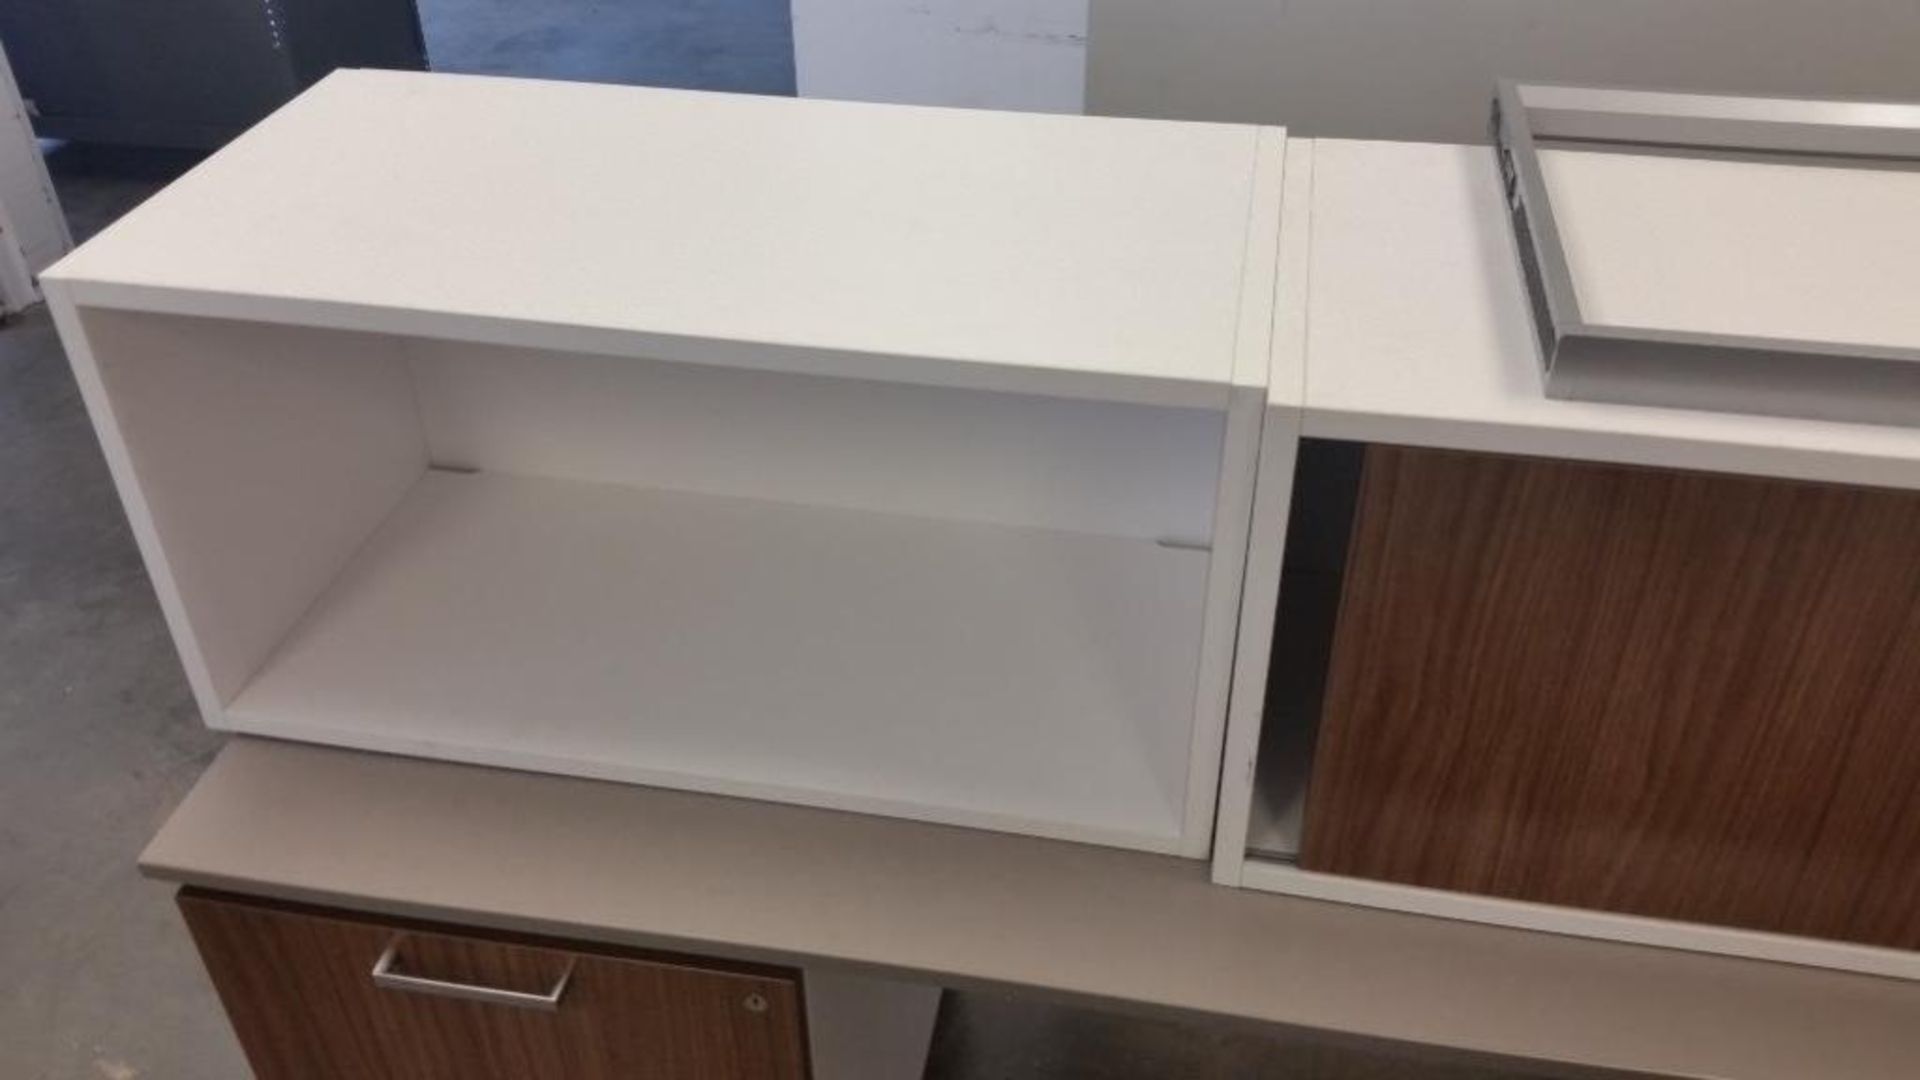 Allsteel office desk with (2) overhead cabinets, (5) drawers, (1) hanging cabinet - Image 4 of 5